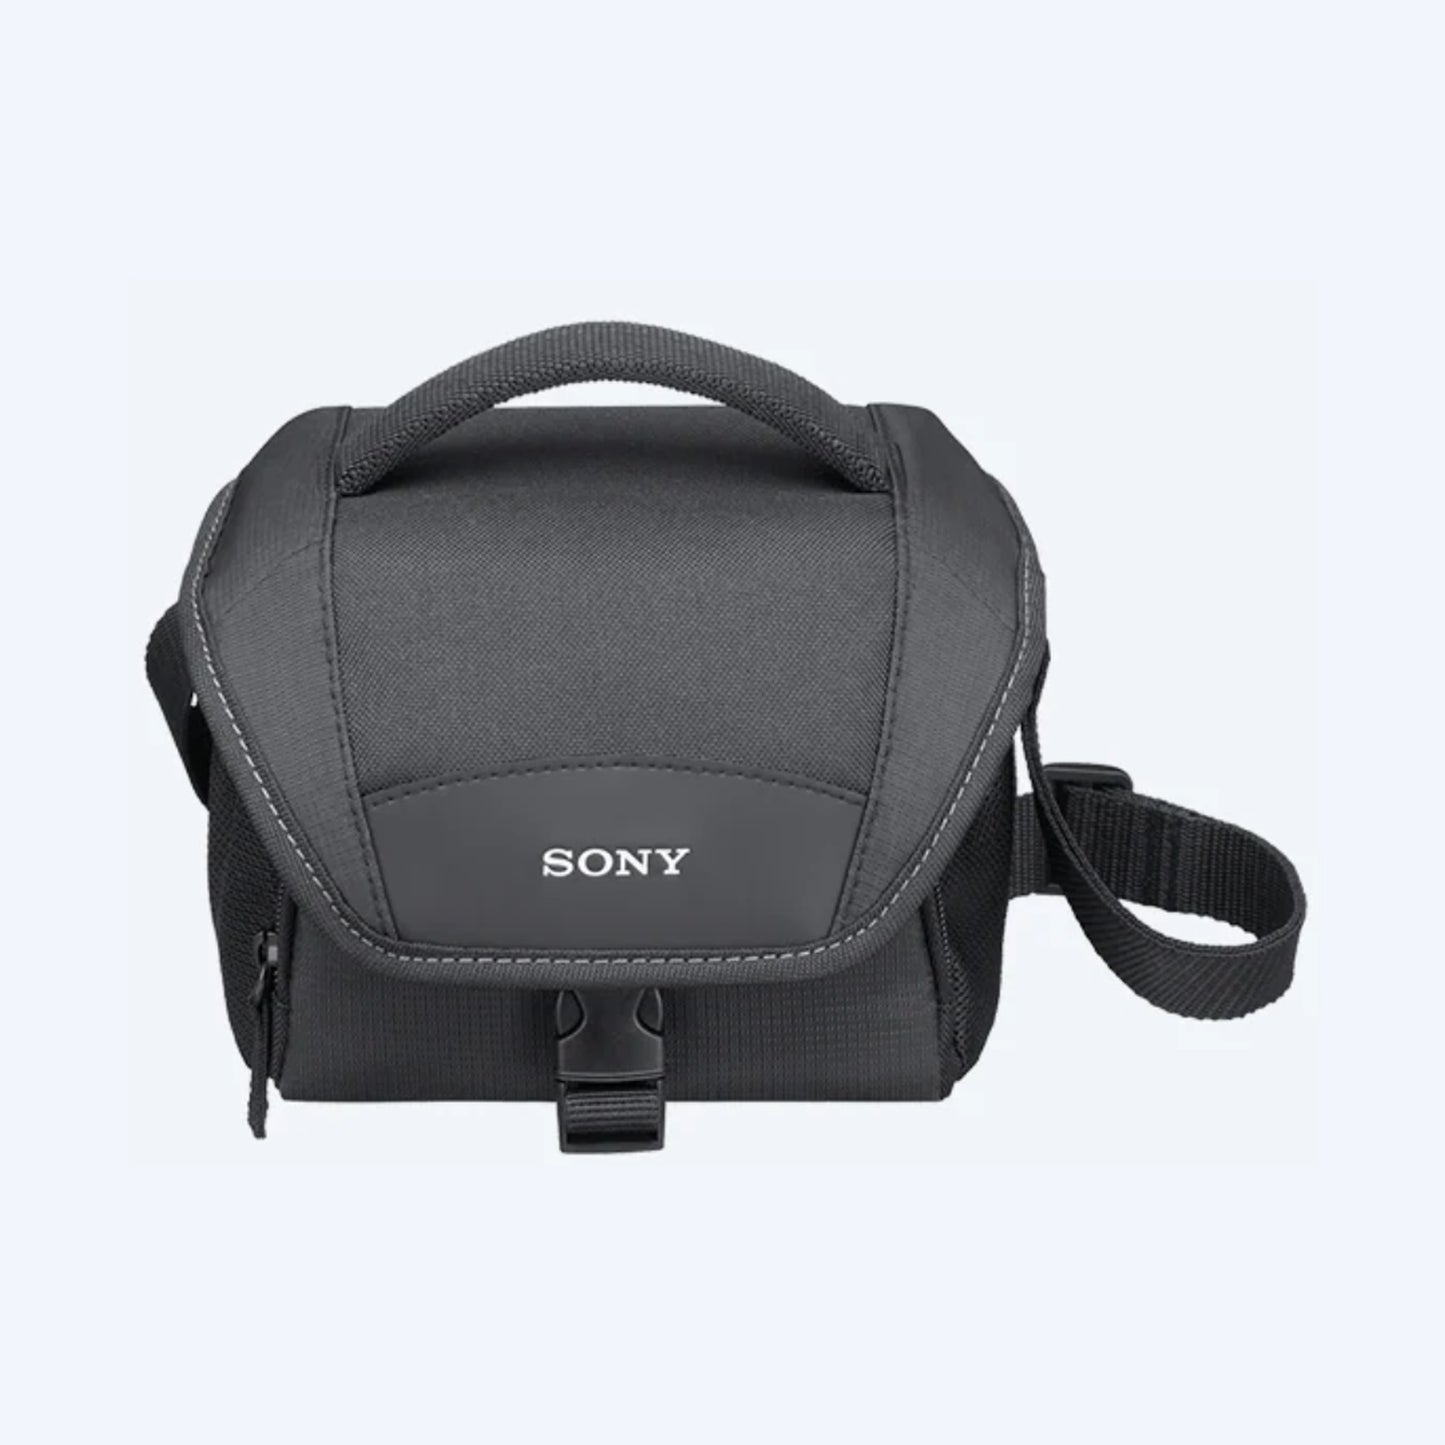 Sony LCS-U11 Soft Carrying Case For Camcorder